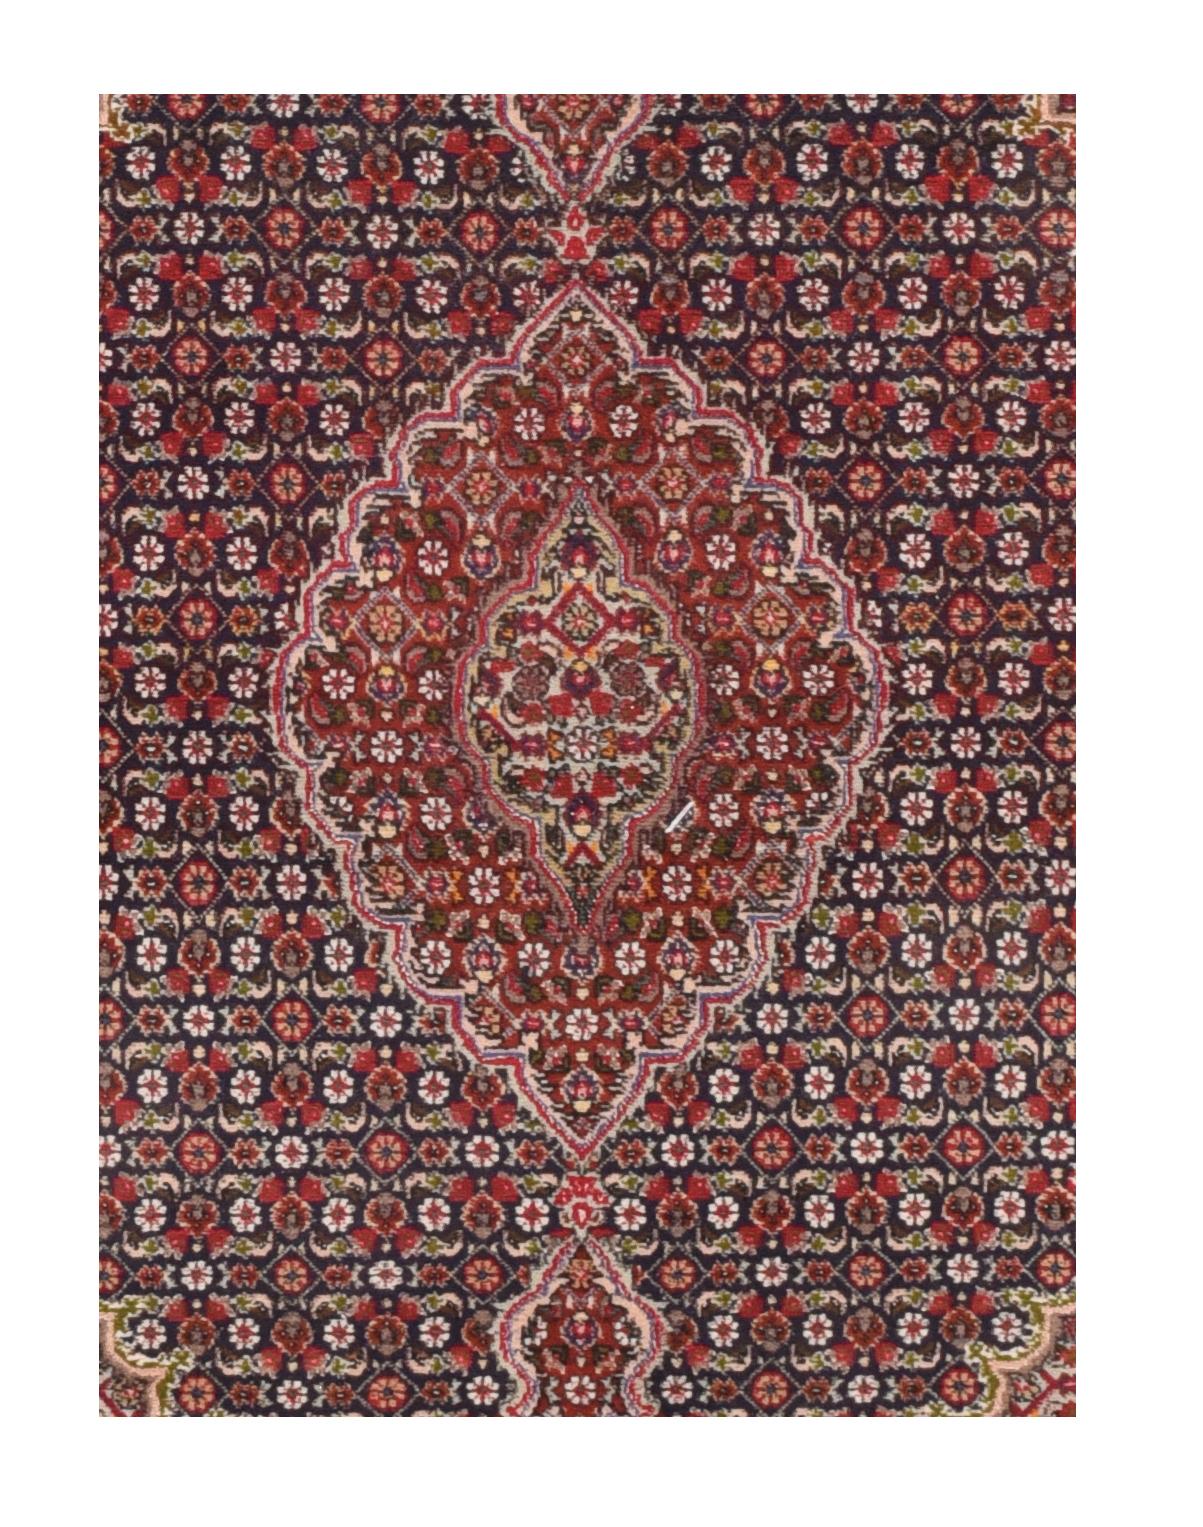 Fine vintage Tabriz Persian rug, wool and silk, hand knotted, circa 1970, red, rose, blue
 

A Tabriz rug/carpet is a type in the general category of Persian carpets from the city of Tabriz, the capital city of East Azarbaijan Province in north